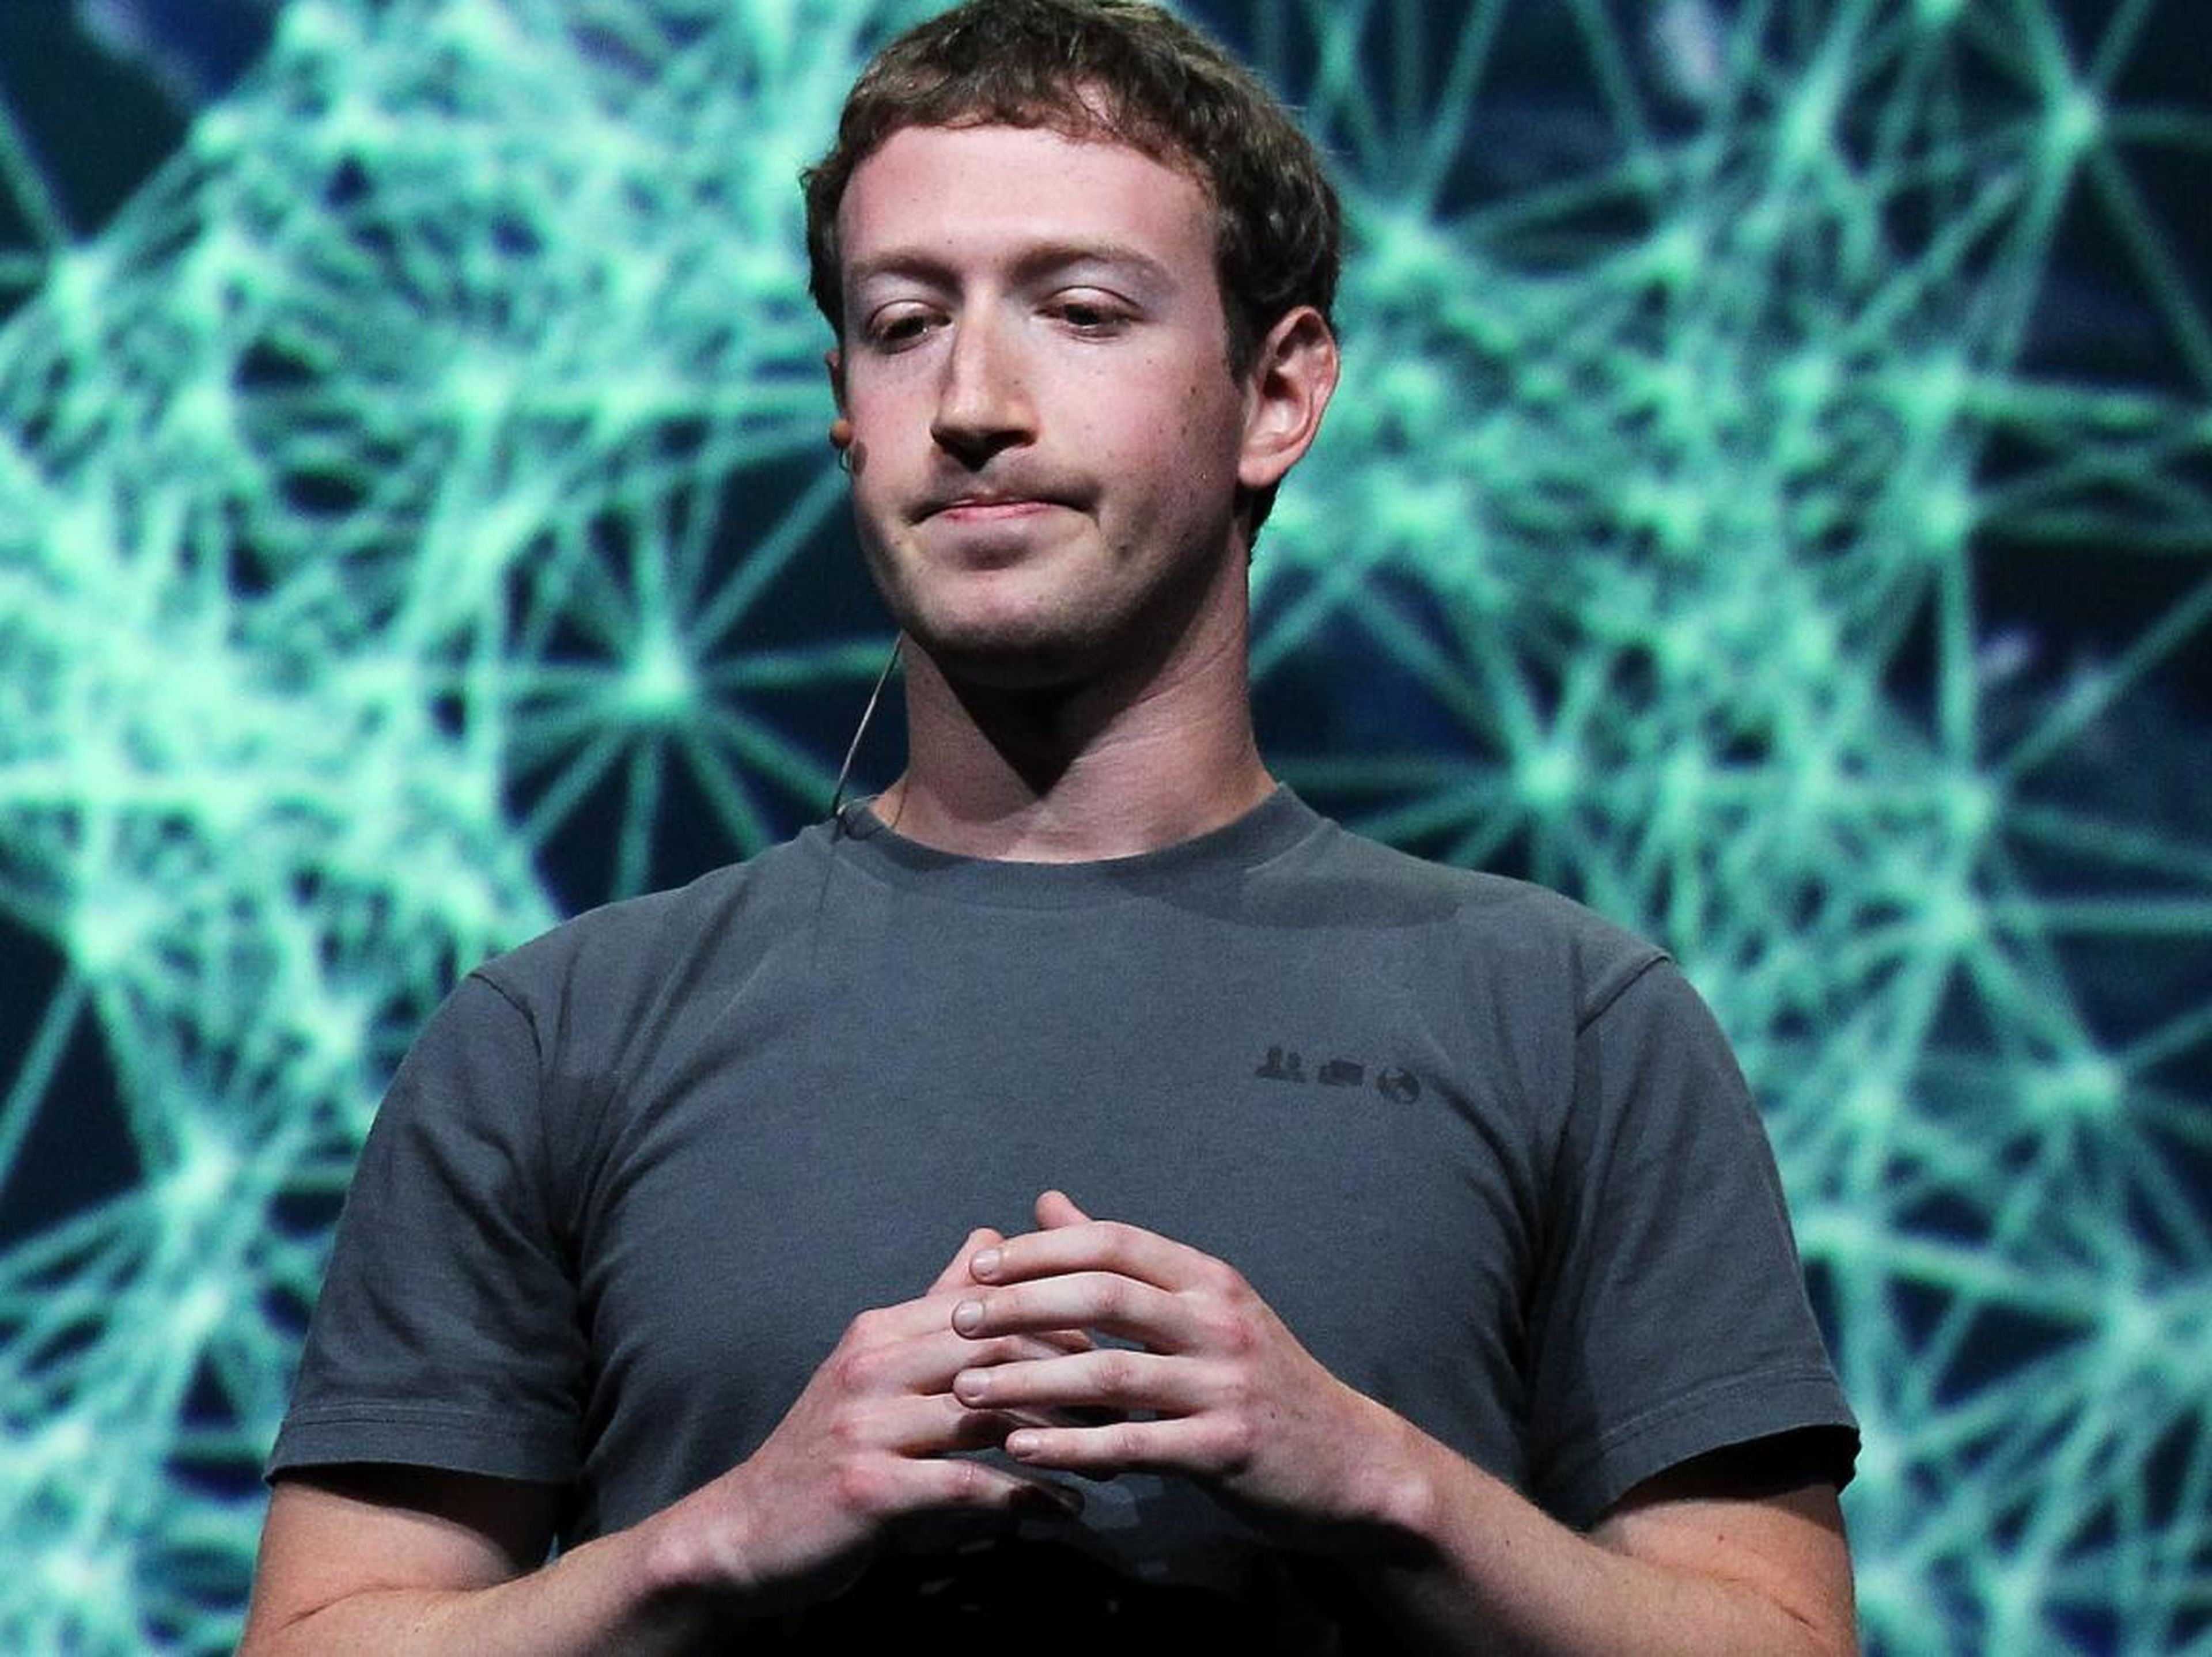 Facebook CEO Mark Zuckerberg probably doesn't want you to do either of these things.